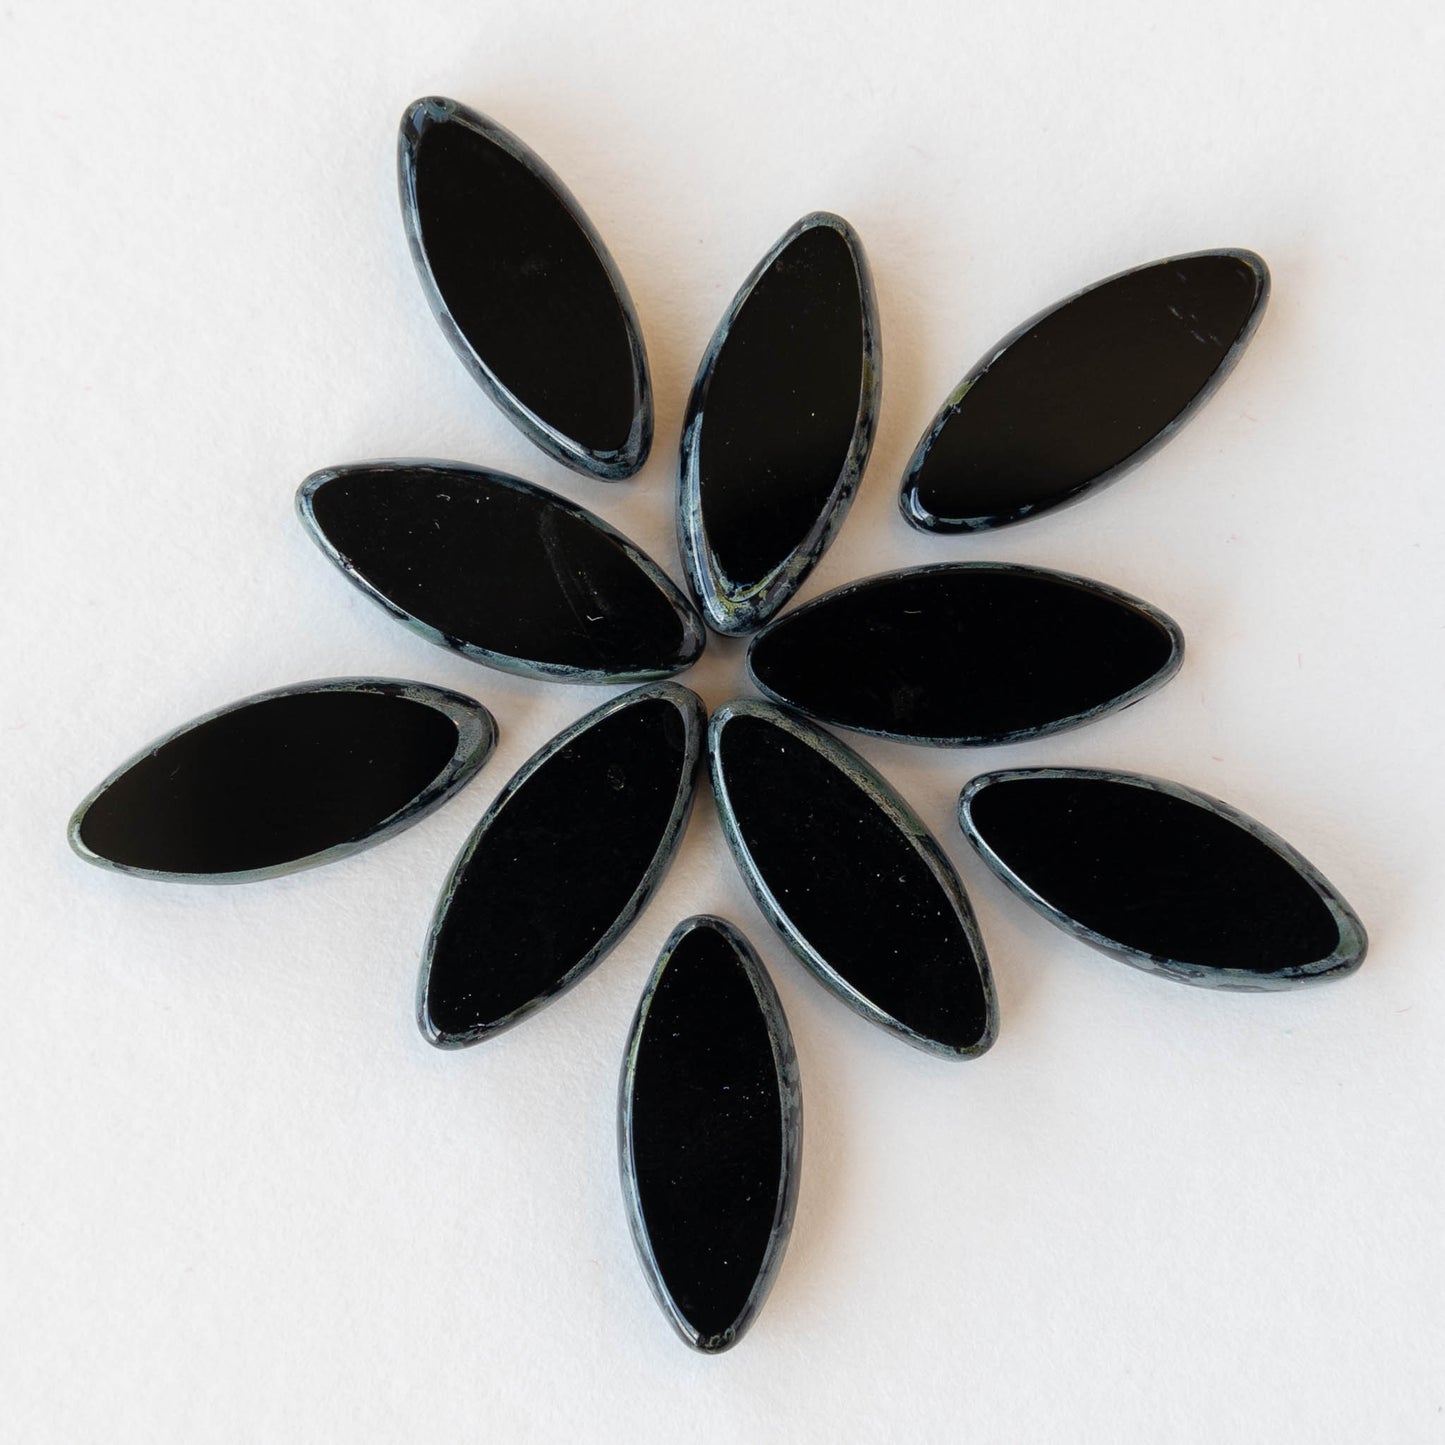 18mm Glass Spindle Beads - Black with Picasso Edges - 10 beads